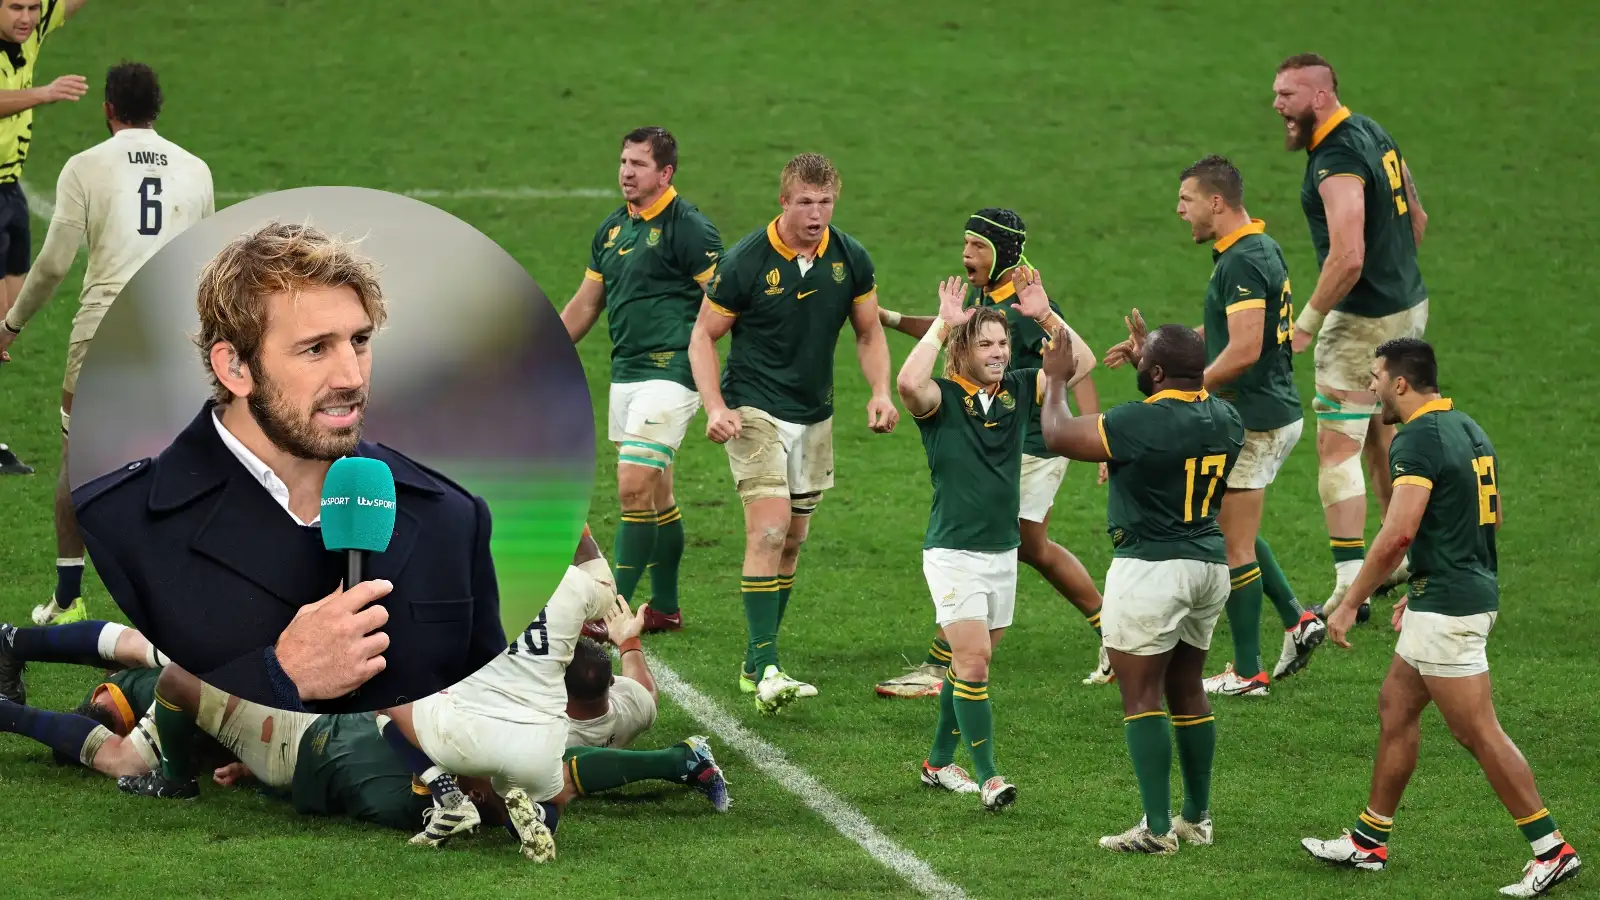 Split with former England captain Chris Robshaw and the Springboks.